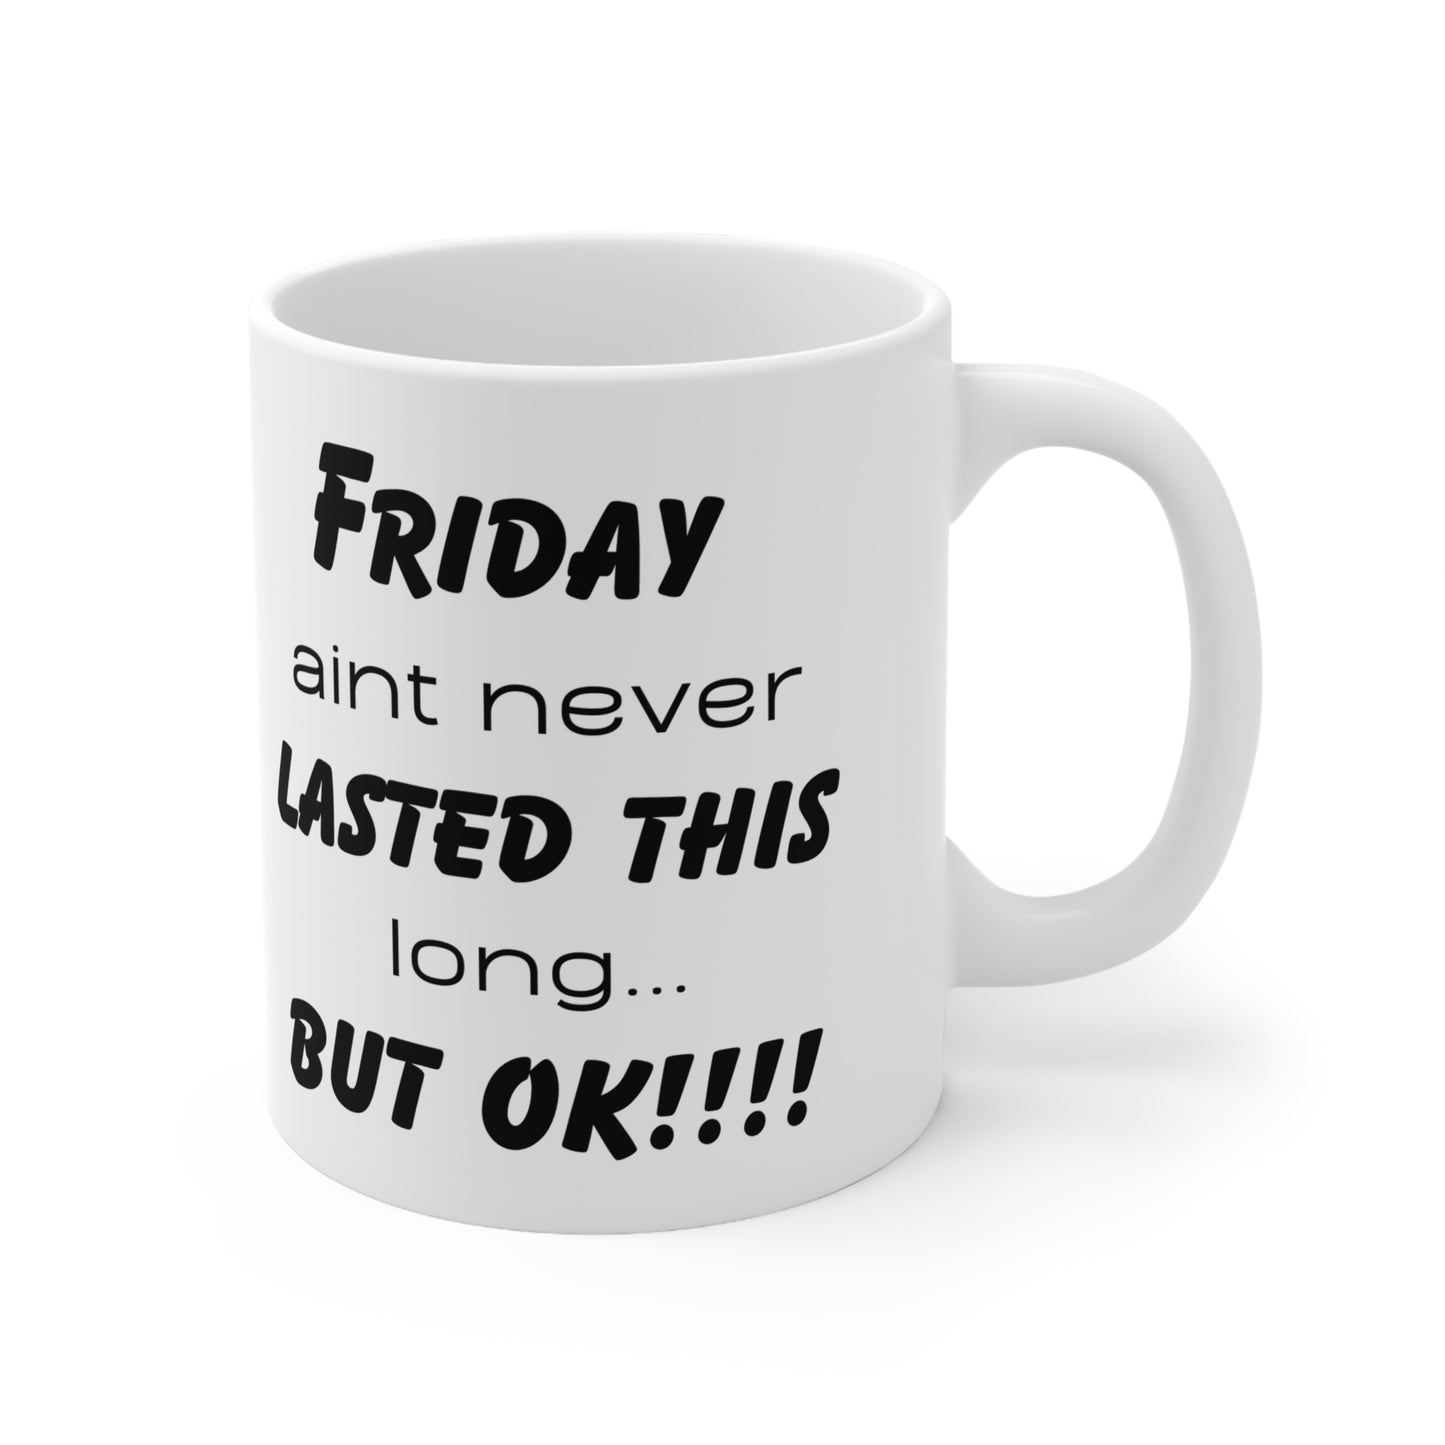 Friday ain't never this long ...but ok! Ceramic Coffee Cups, 11oz, 15oz